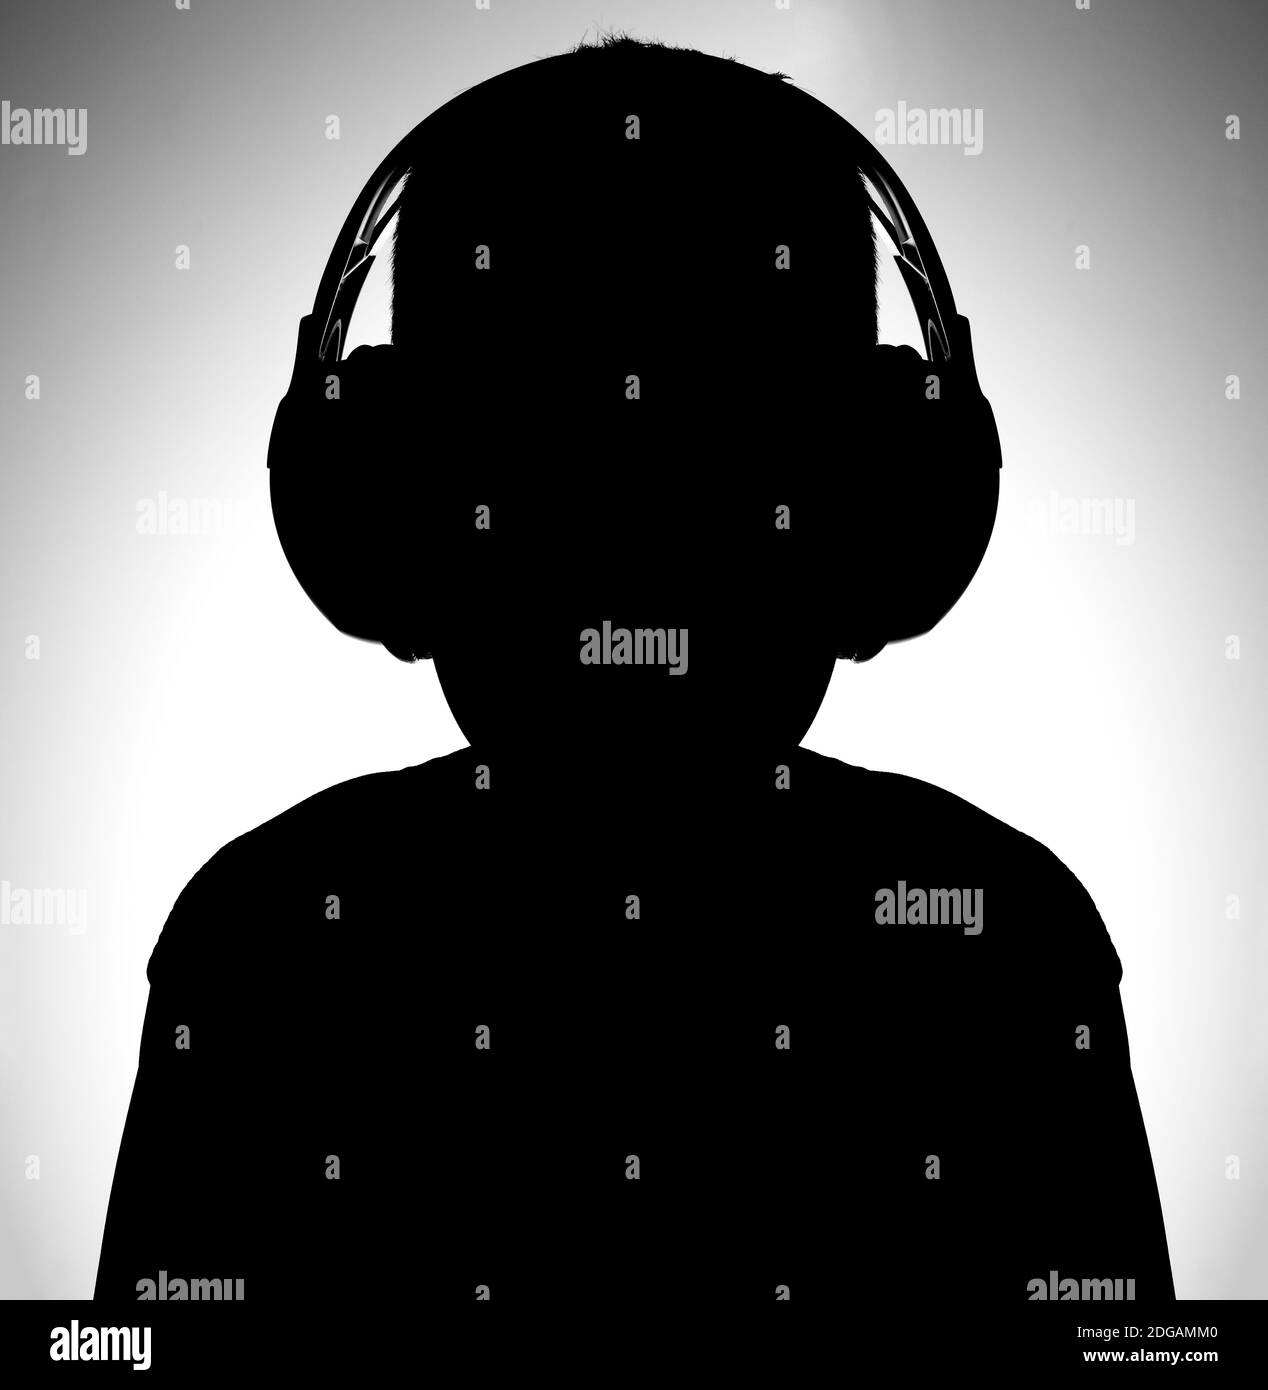 Black and white image silhouette of boy with headphones listening music Stock Photo